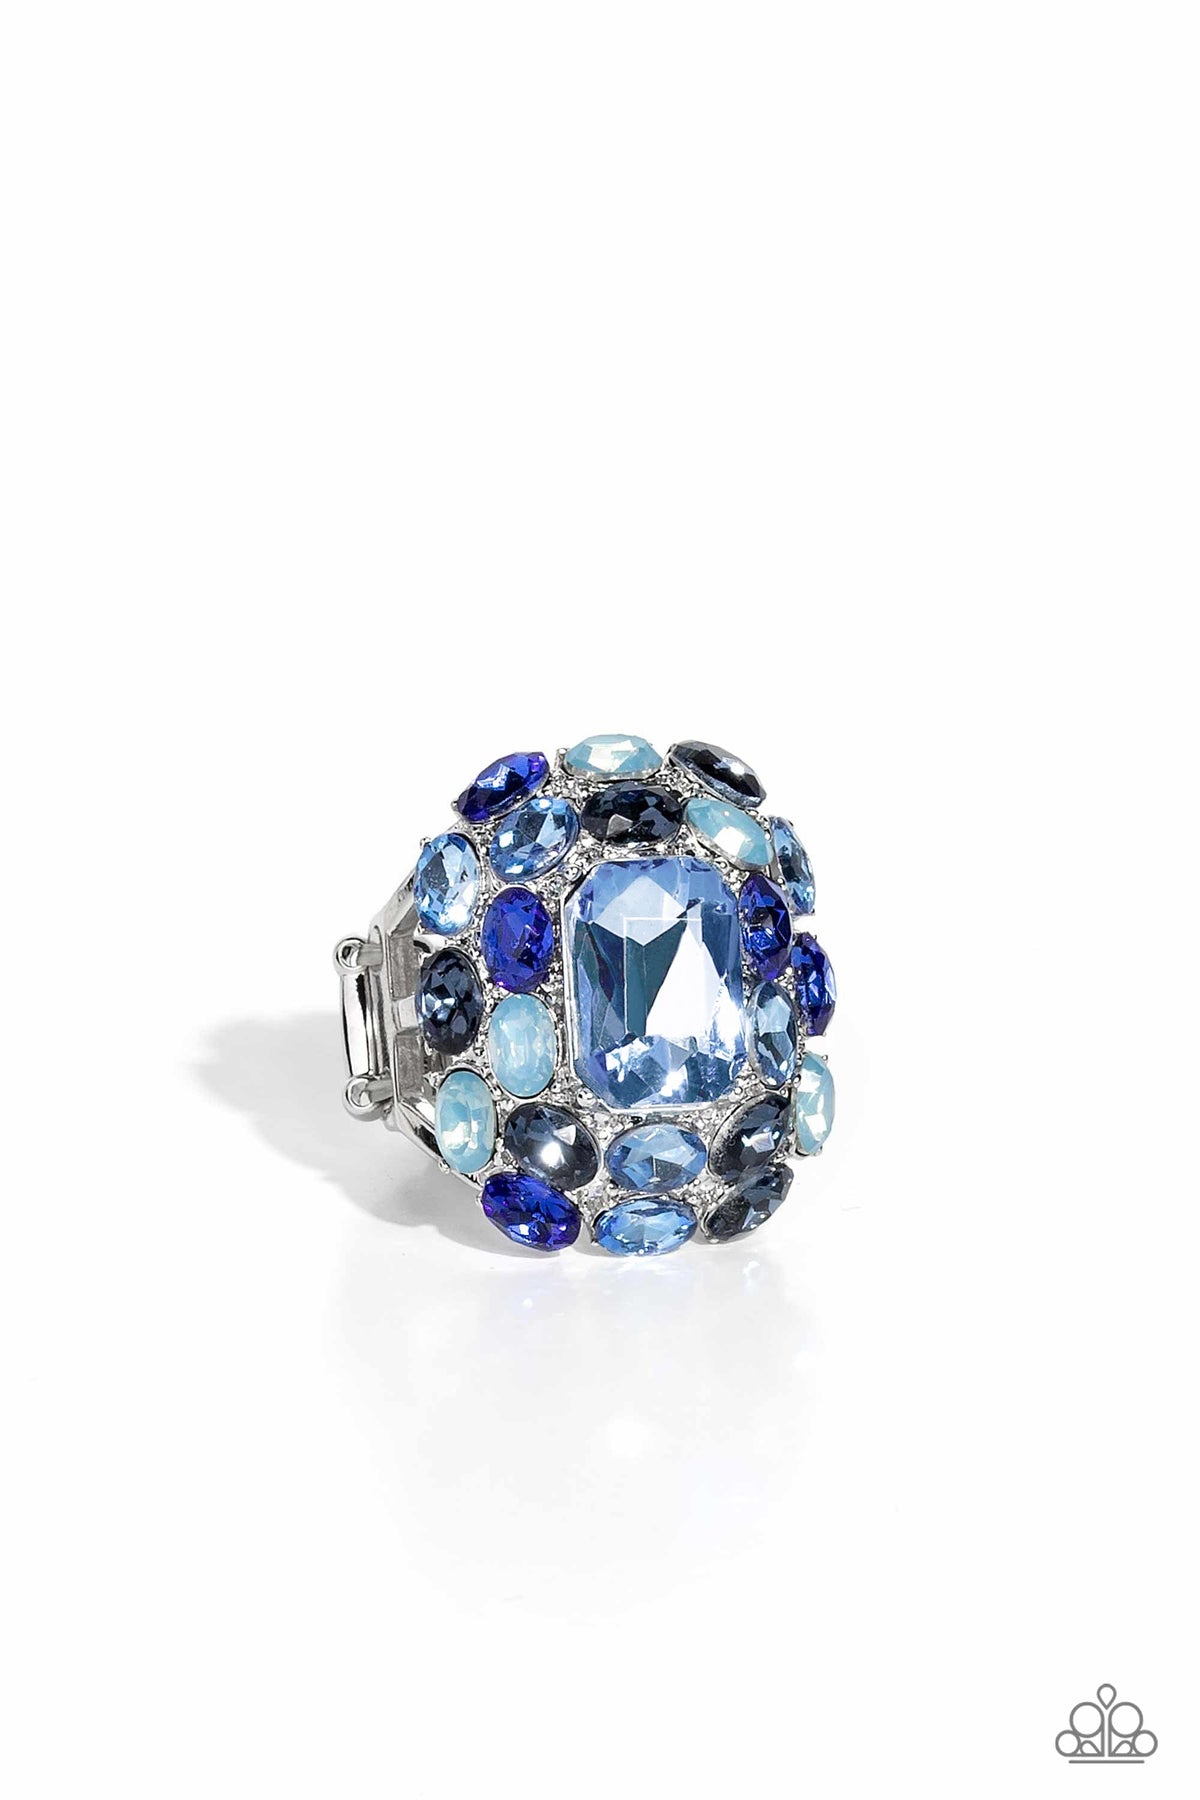 Perfectly Park Avenue Blue Rhinestone Ring - Paparazzi Accessories- lightbox - CarasShop.com - $5 Jewelry by Cara Jewels